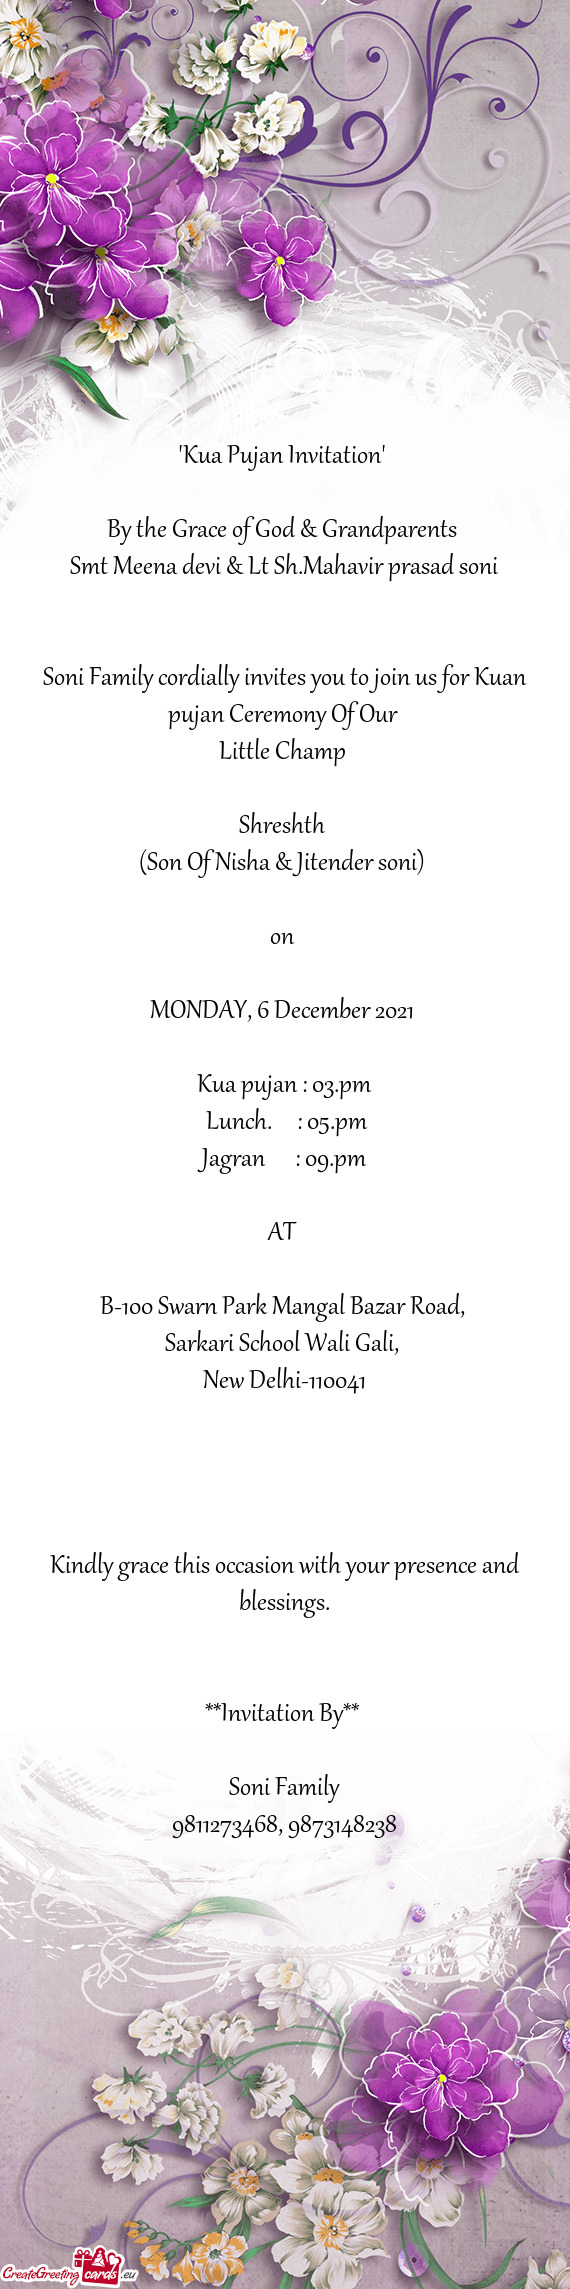 Soni Family cordially invites you to join us for Kuan pujan Ceremony Of Our